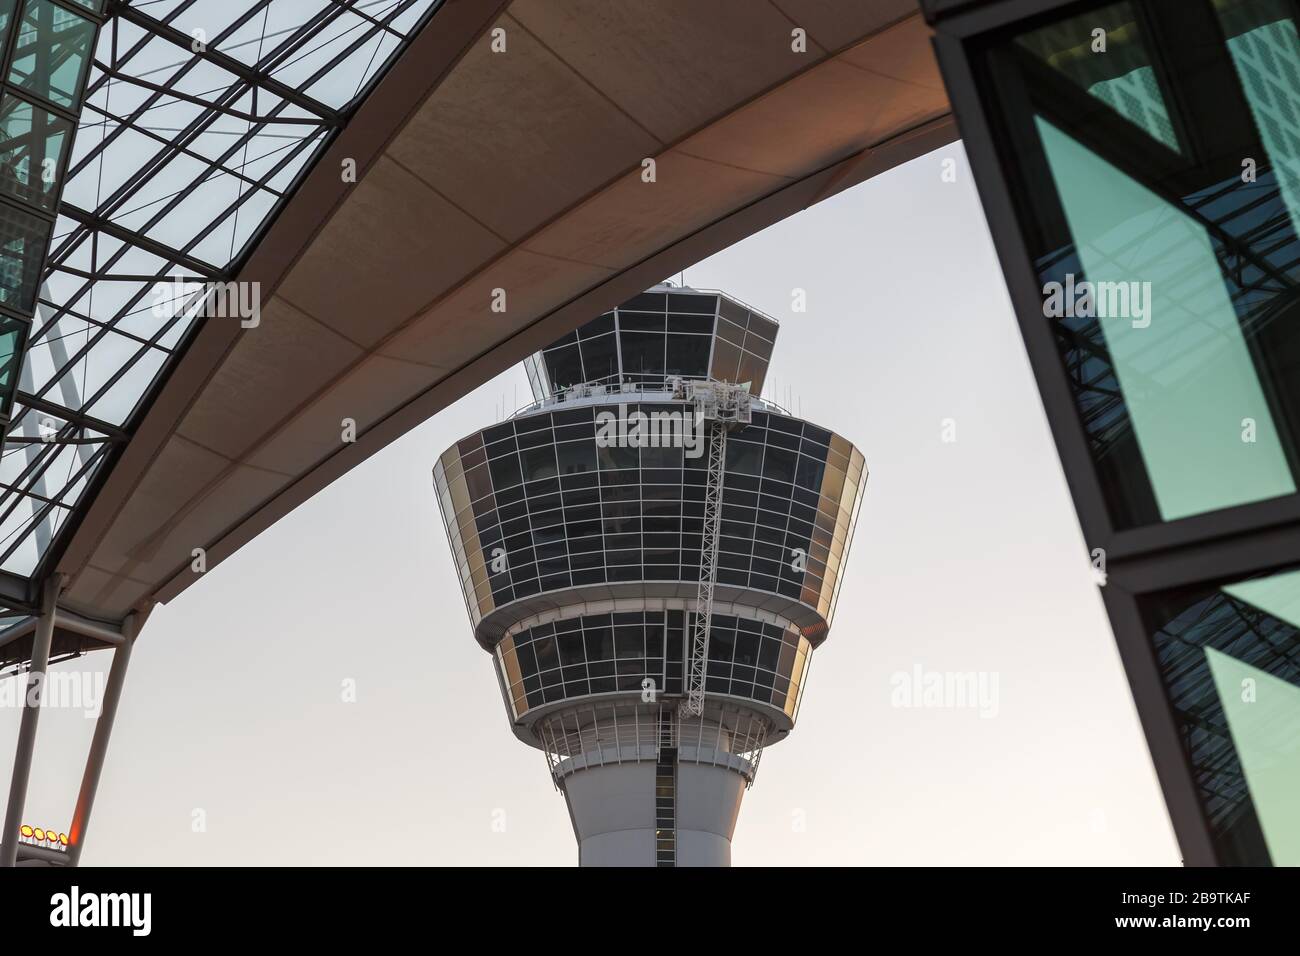 Munich, Germany – October 26, 2019: Tower at Munich airport (MUC) in Germany. Stock Photo